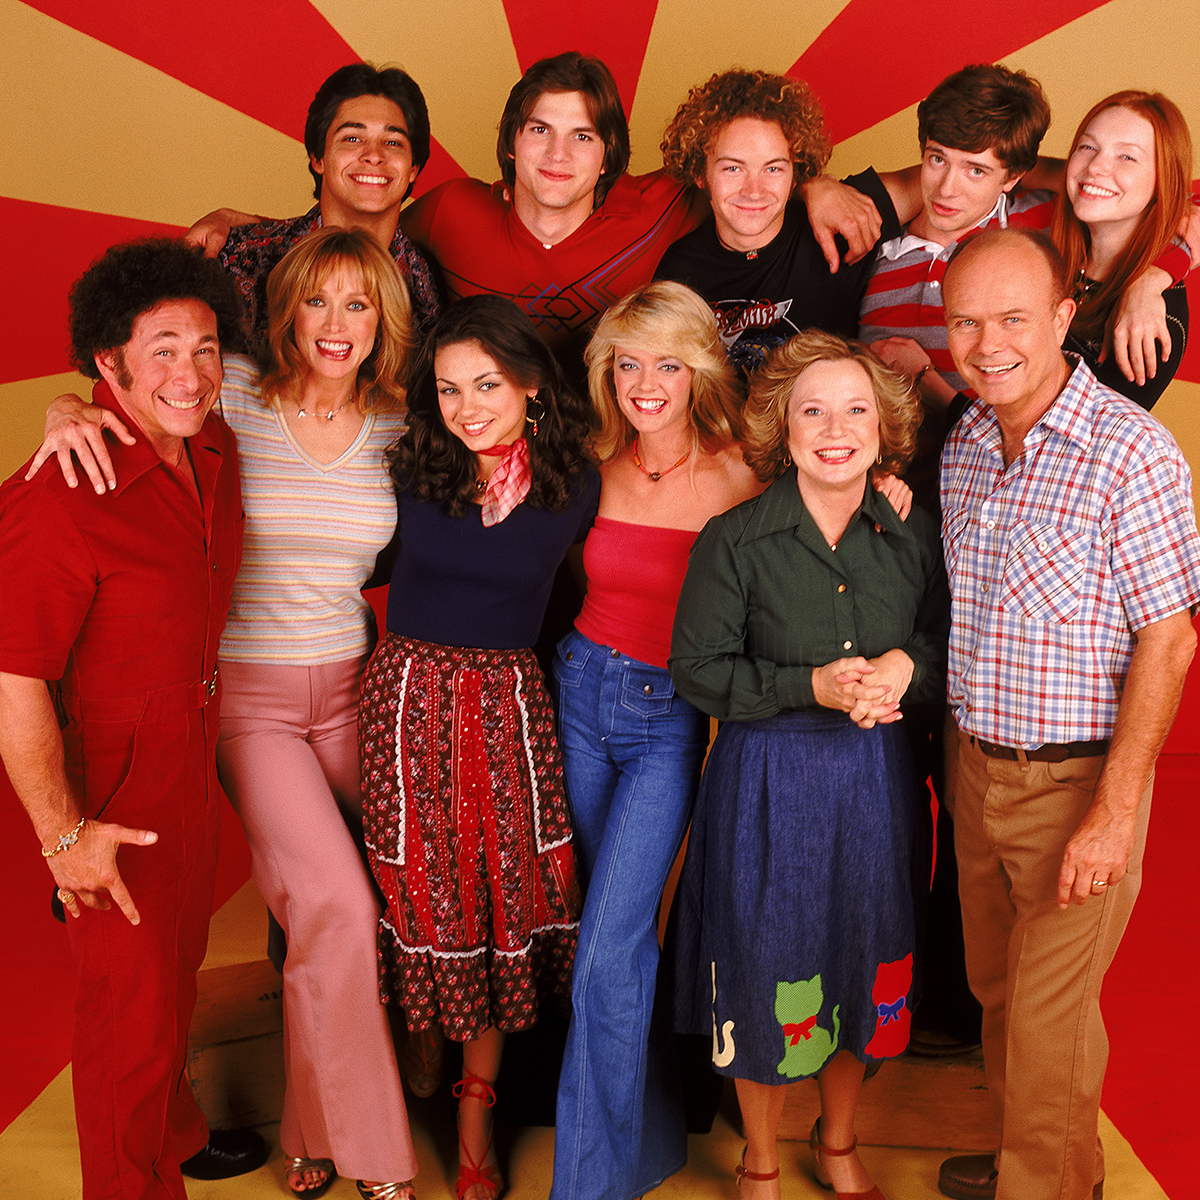 We’re All Alright After Checking In With That ’70s Show’s Stars